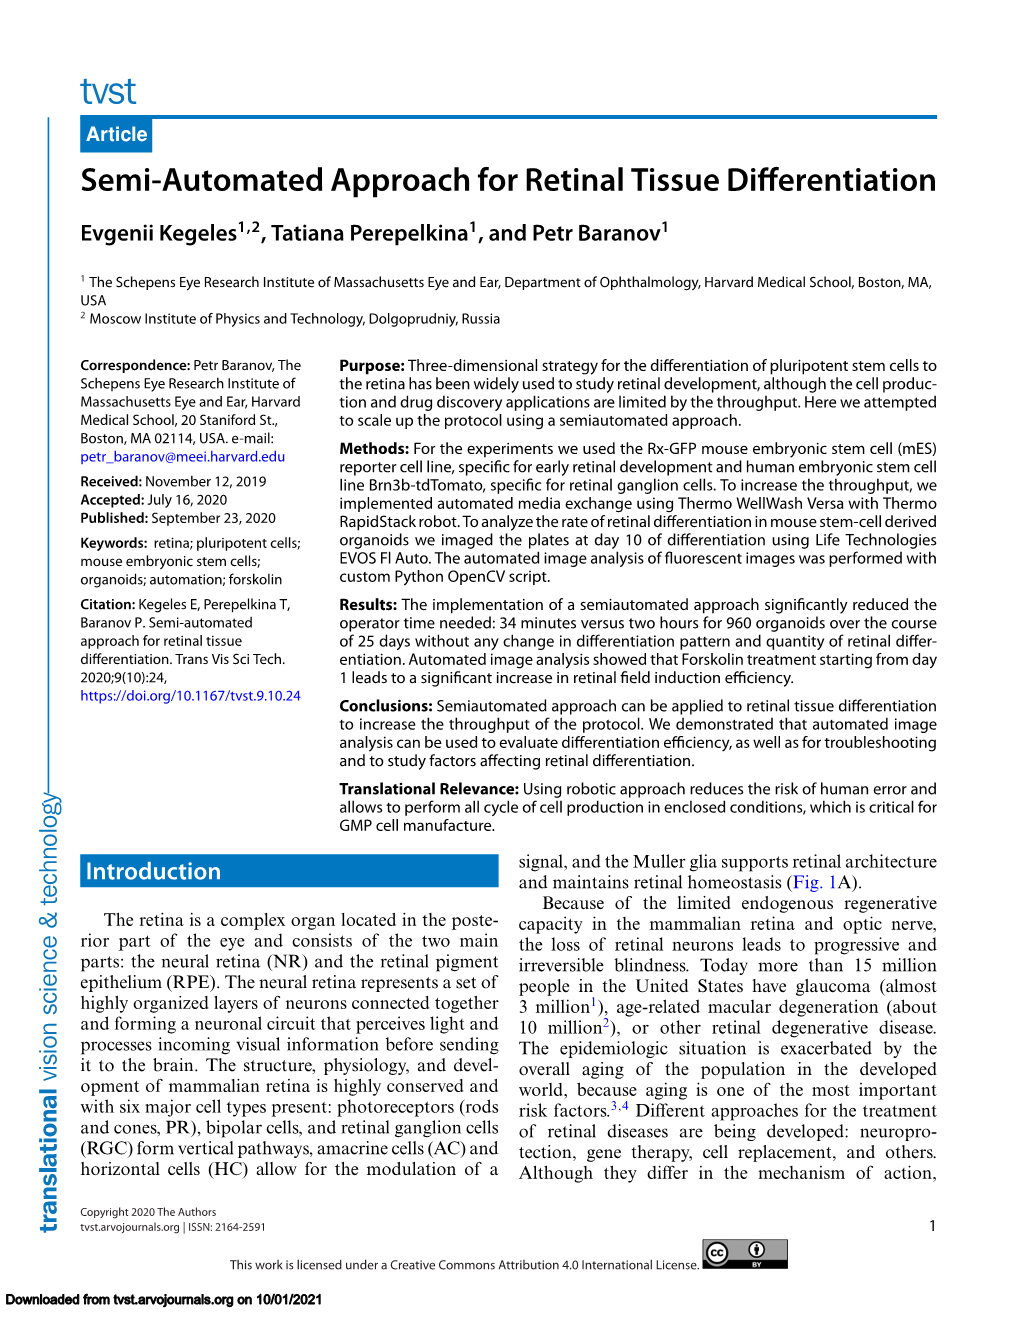 Semi-Automated Approach for Retinal Tissue Differentiation